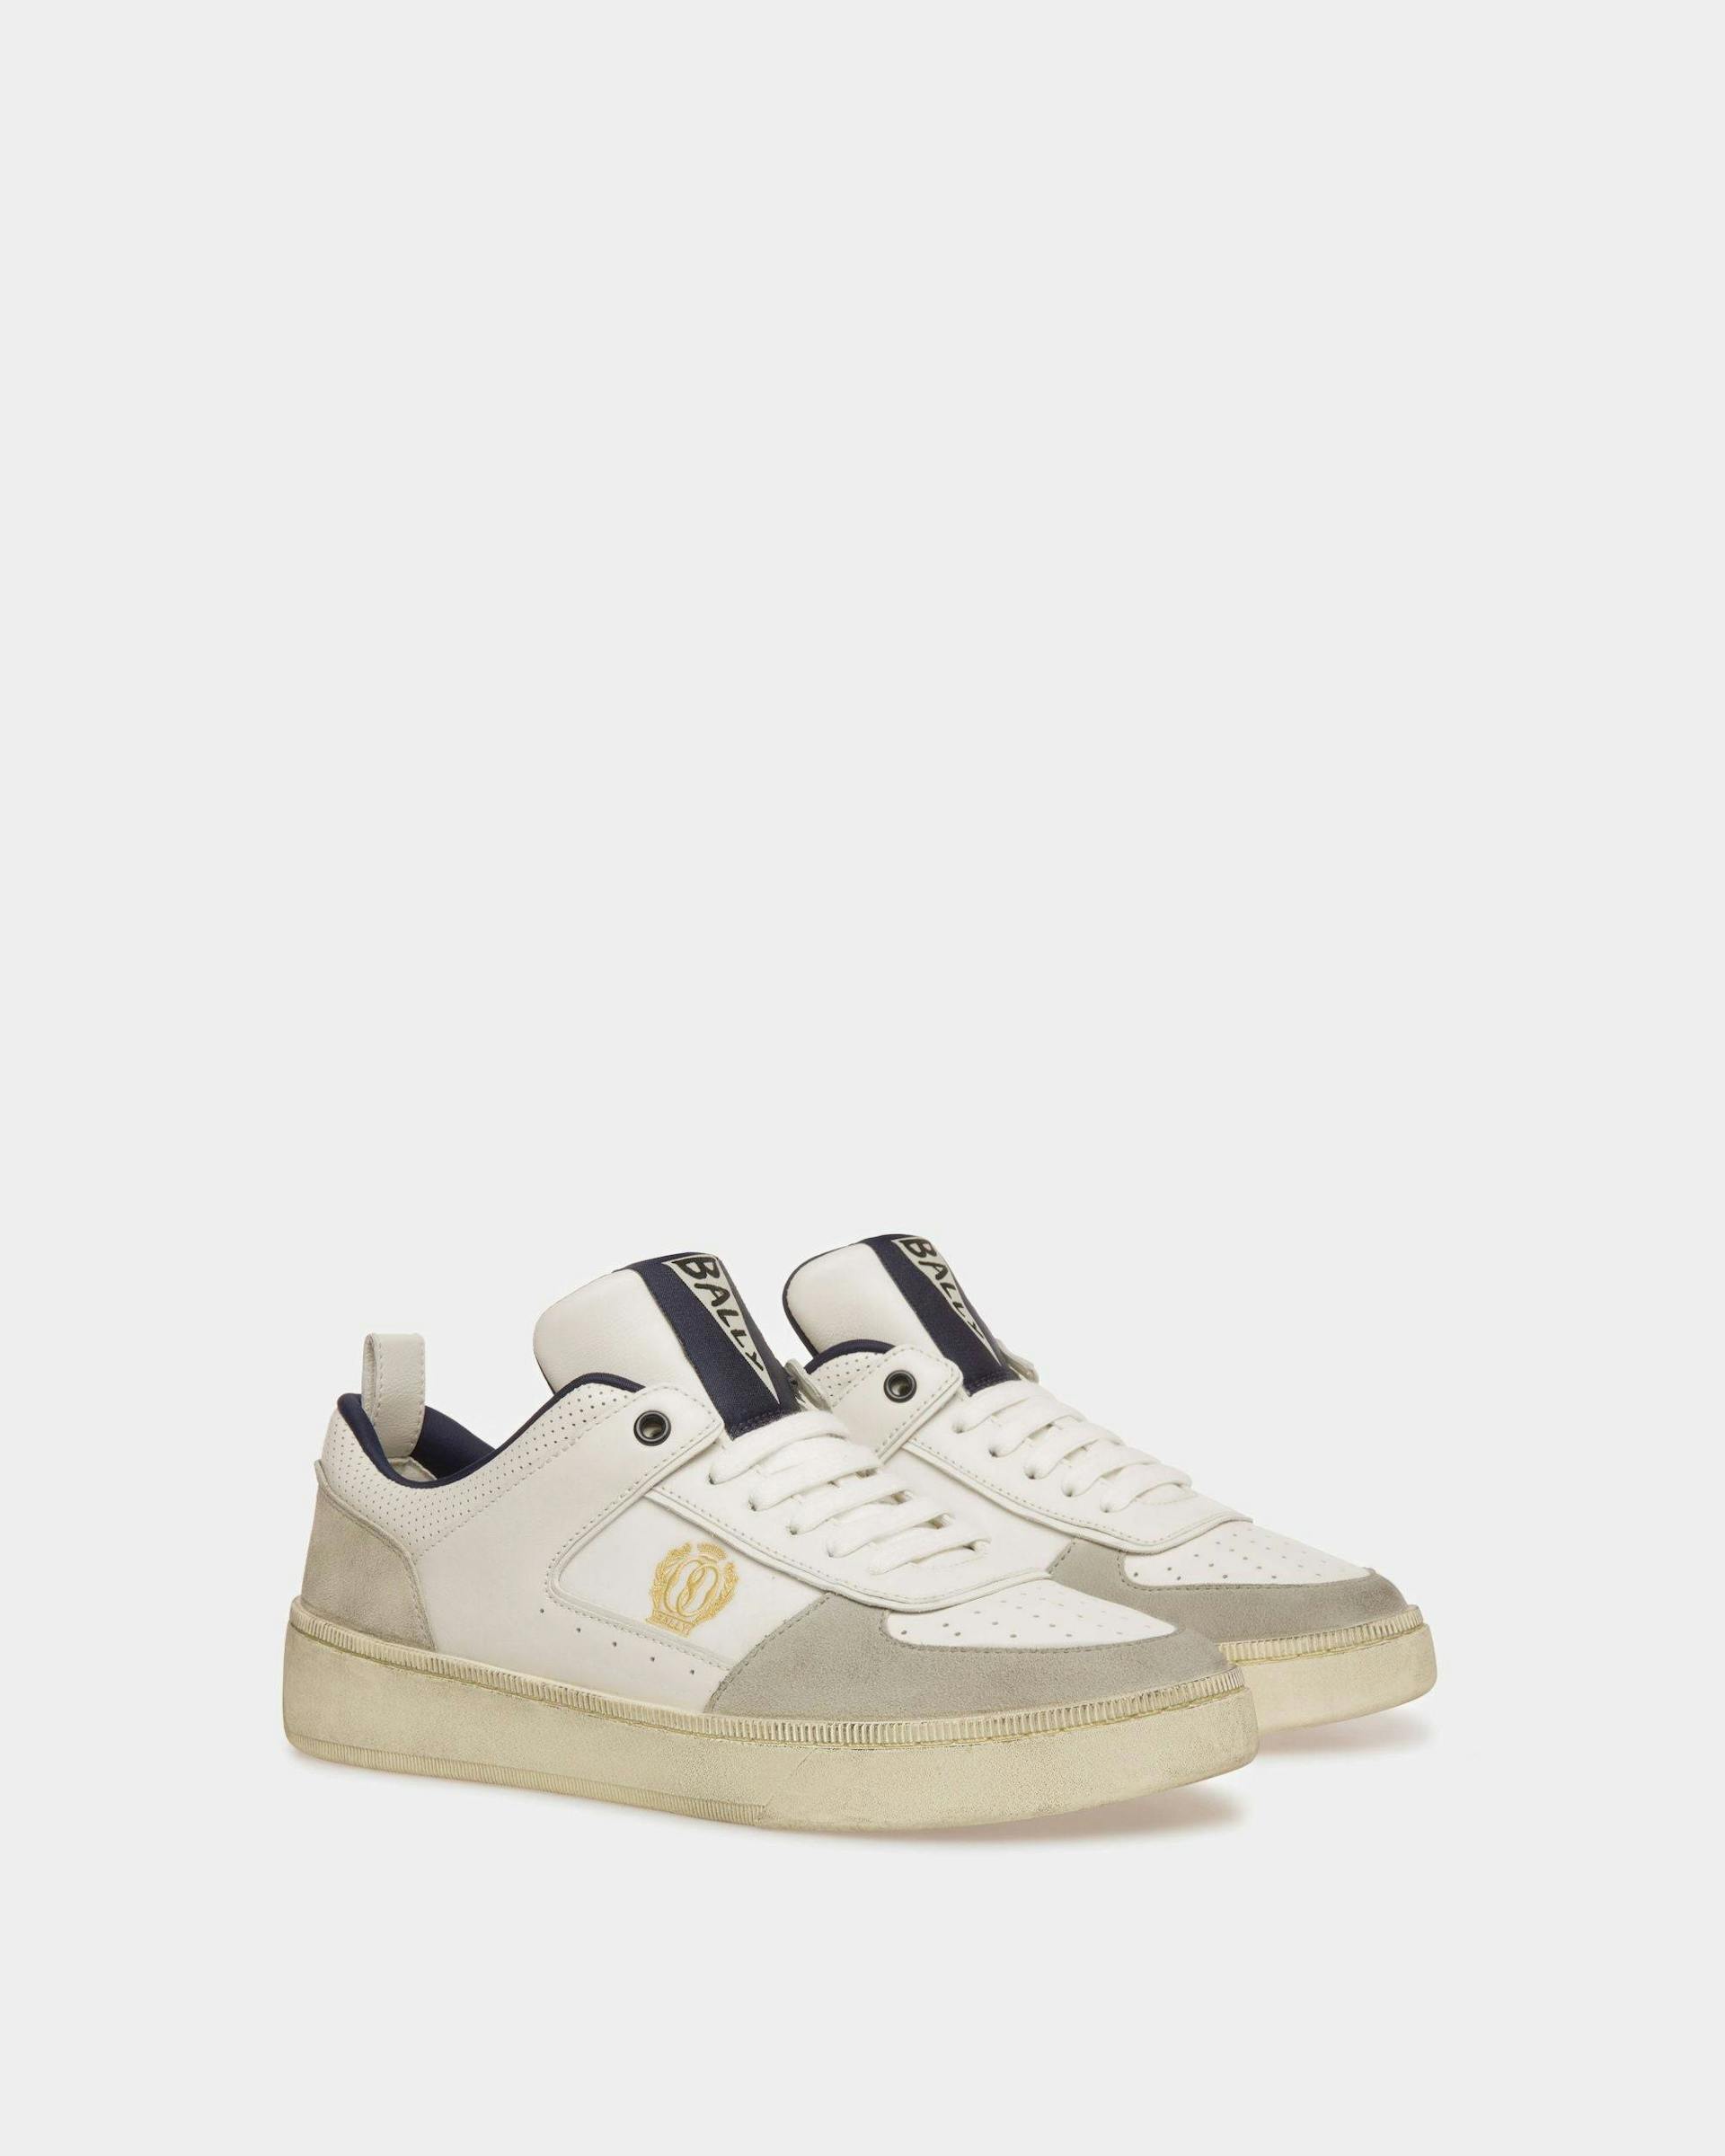 Raise Sneakers In Dusty White And Midnight Leather And Fabric - Men's - Bally - 02